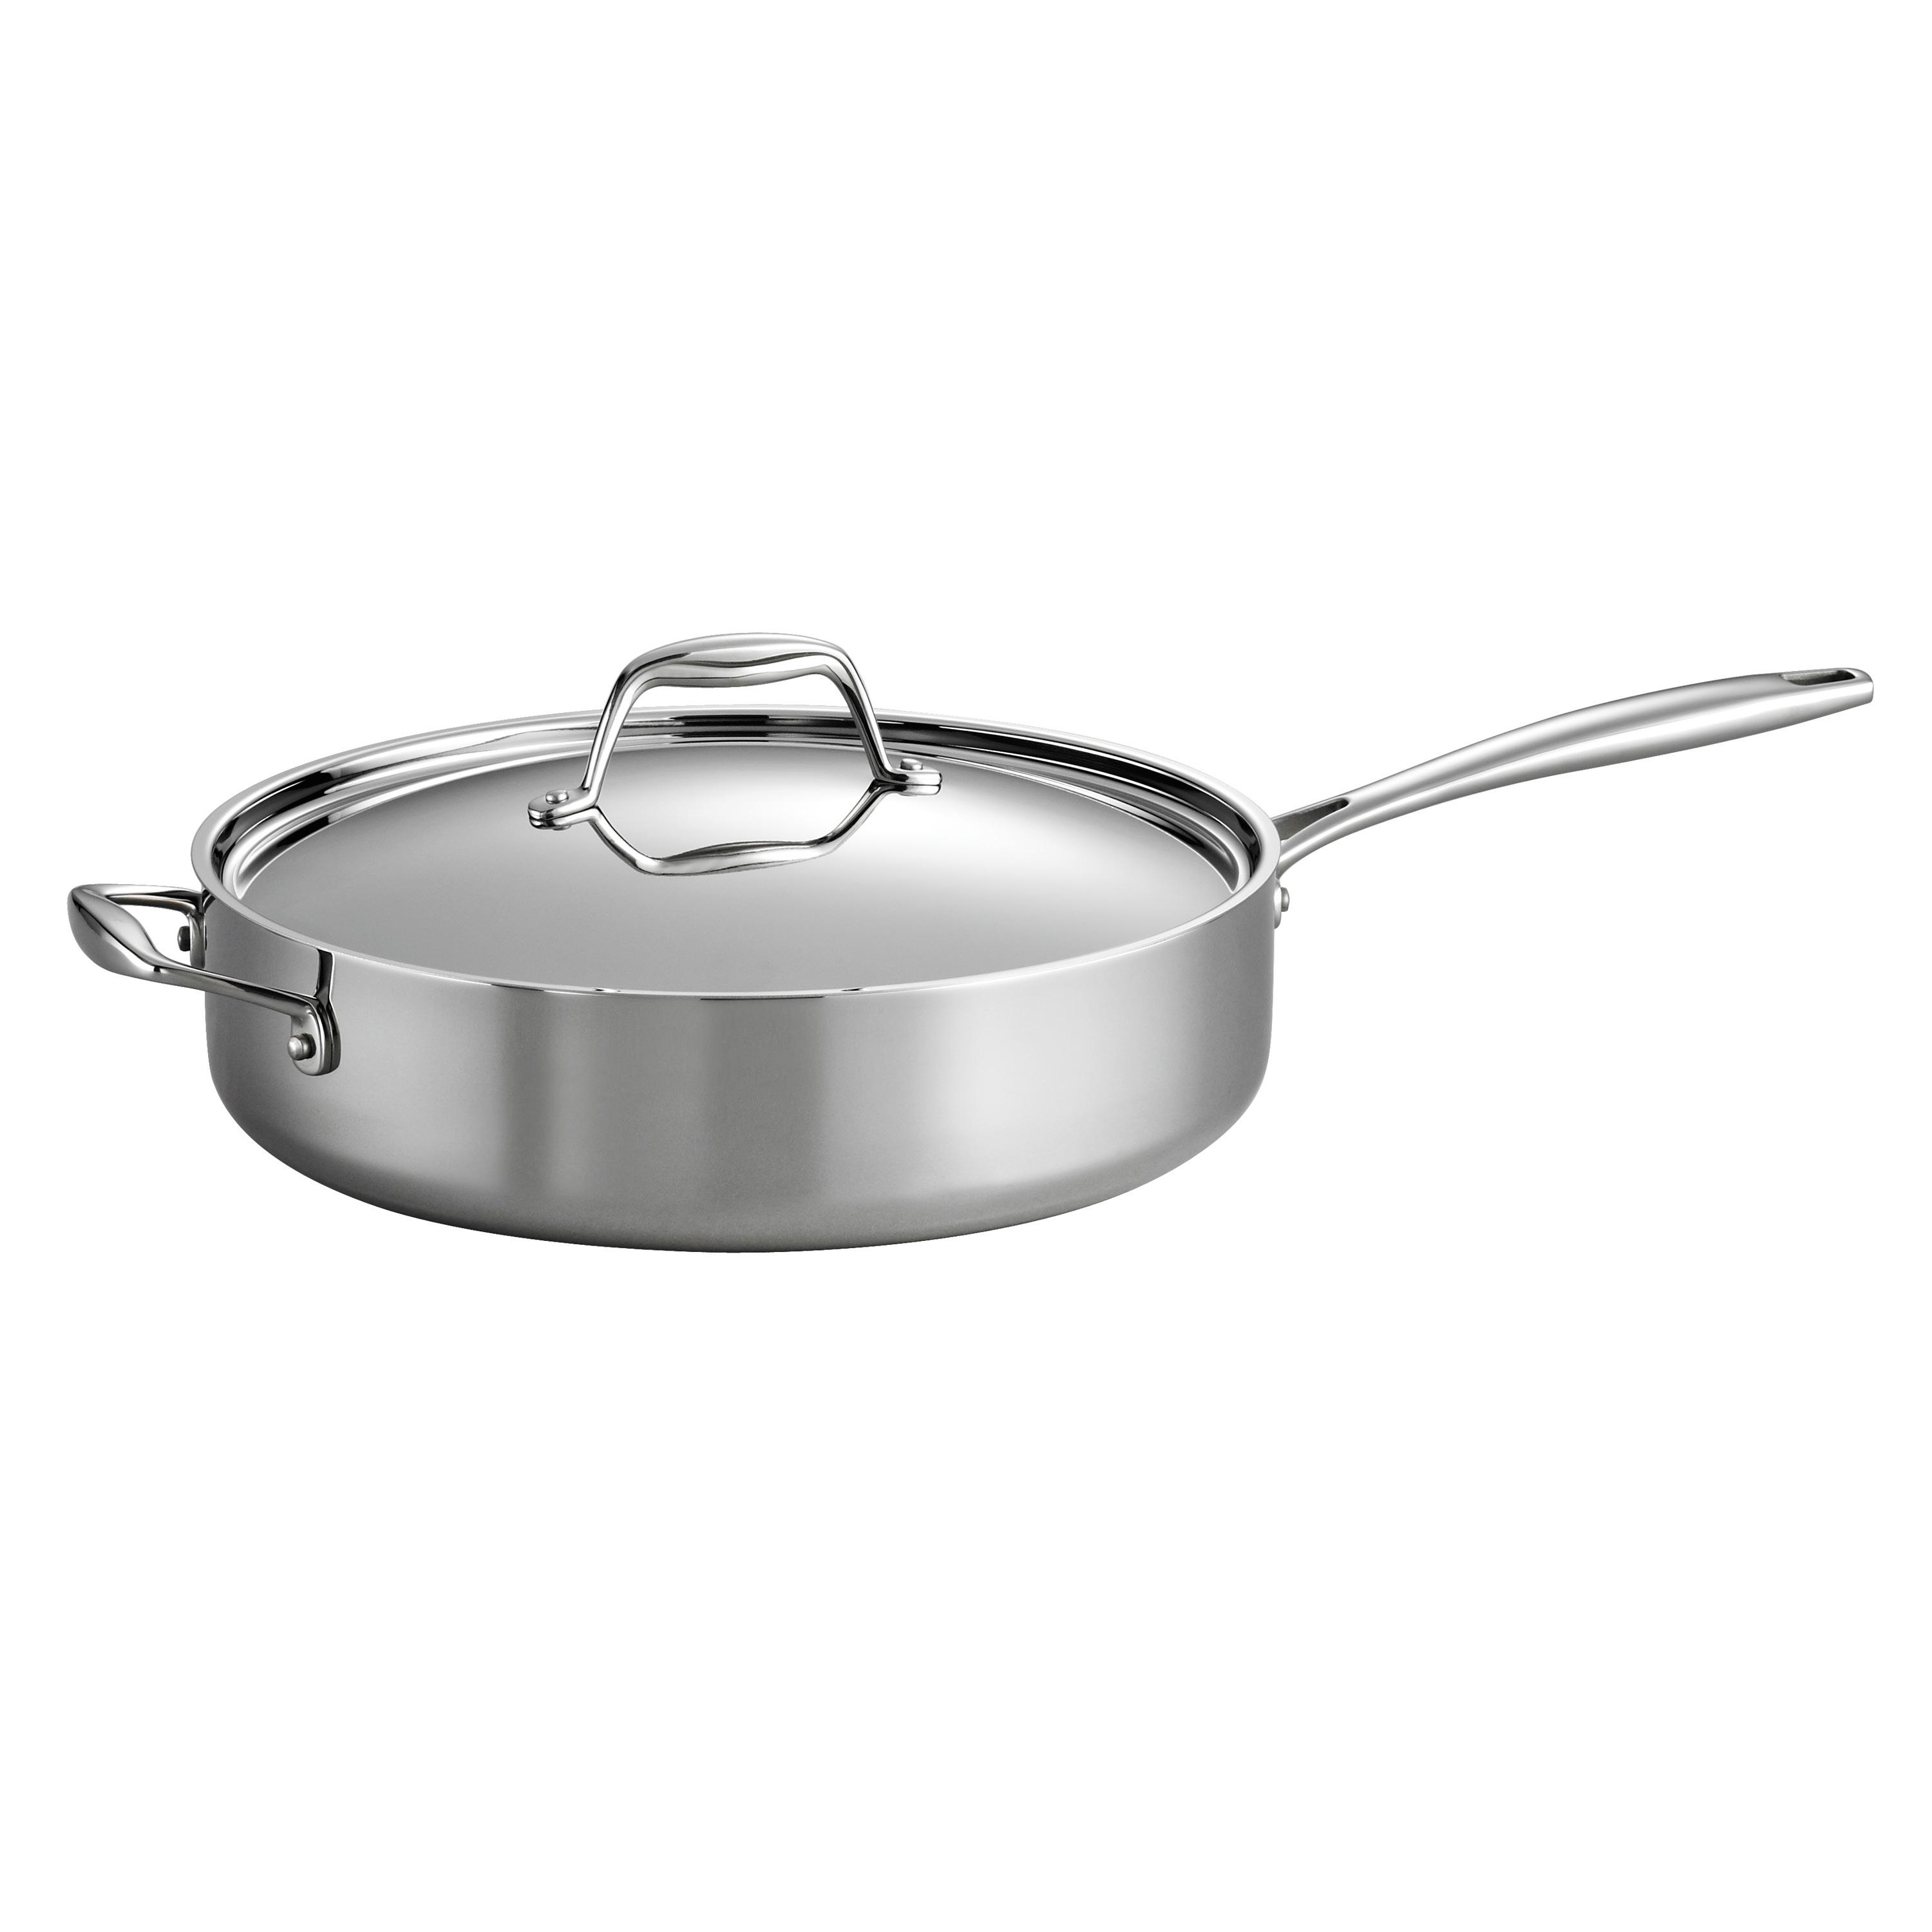 0016017101104 - GOURMET -TRI-PLY CLAD 18/10 STAINLESS STEEL INDUCTION-READY 5.5 QT DEEP SAUTE PAN